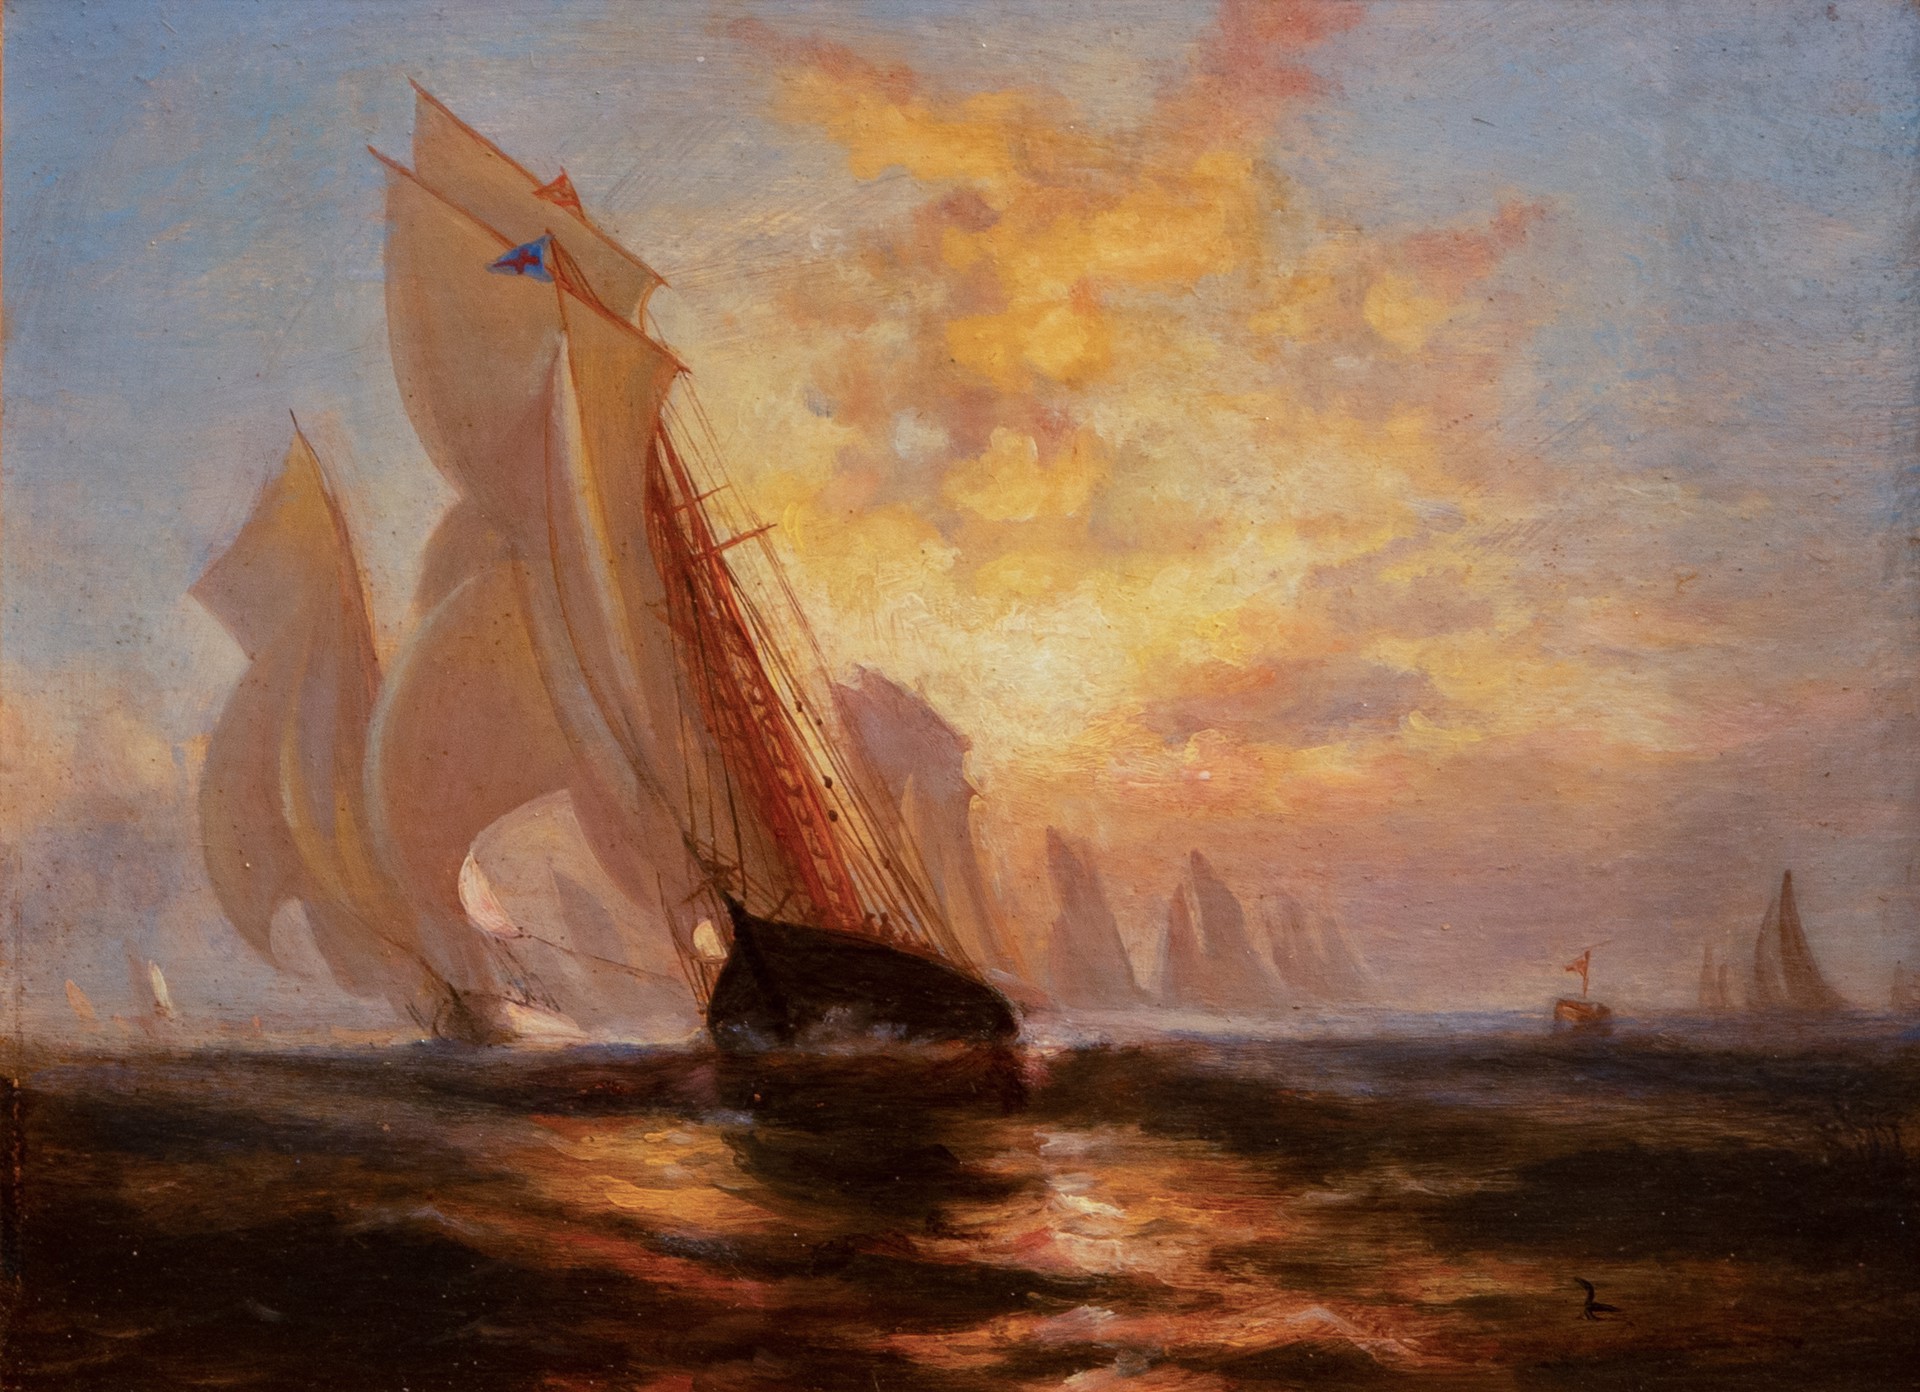 "Madeline" 1876 America's Cup Defender (After Edward Moran) by Peter Layne Arguimbau